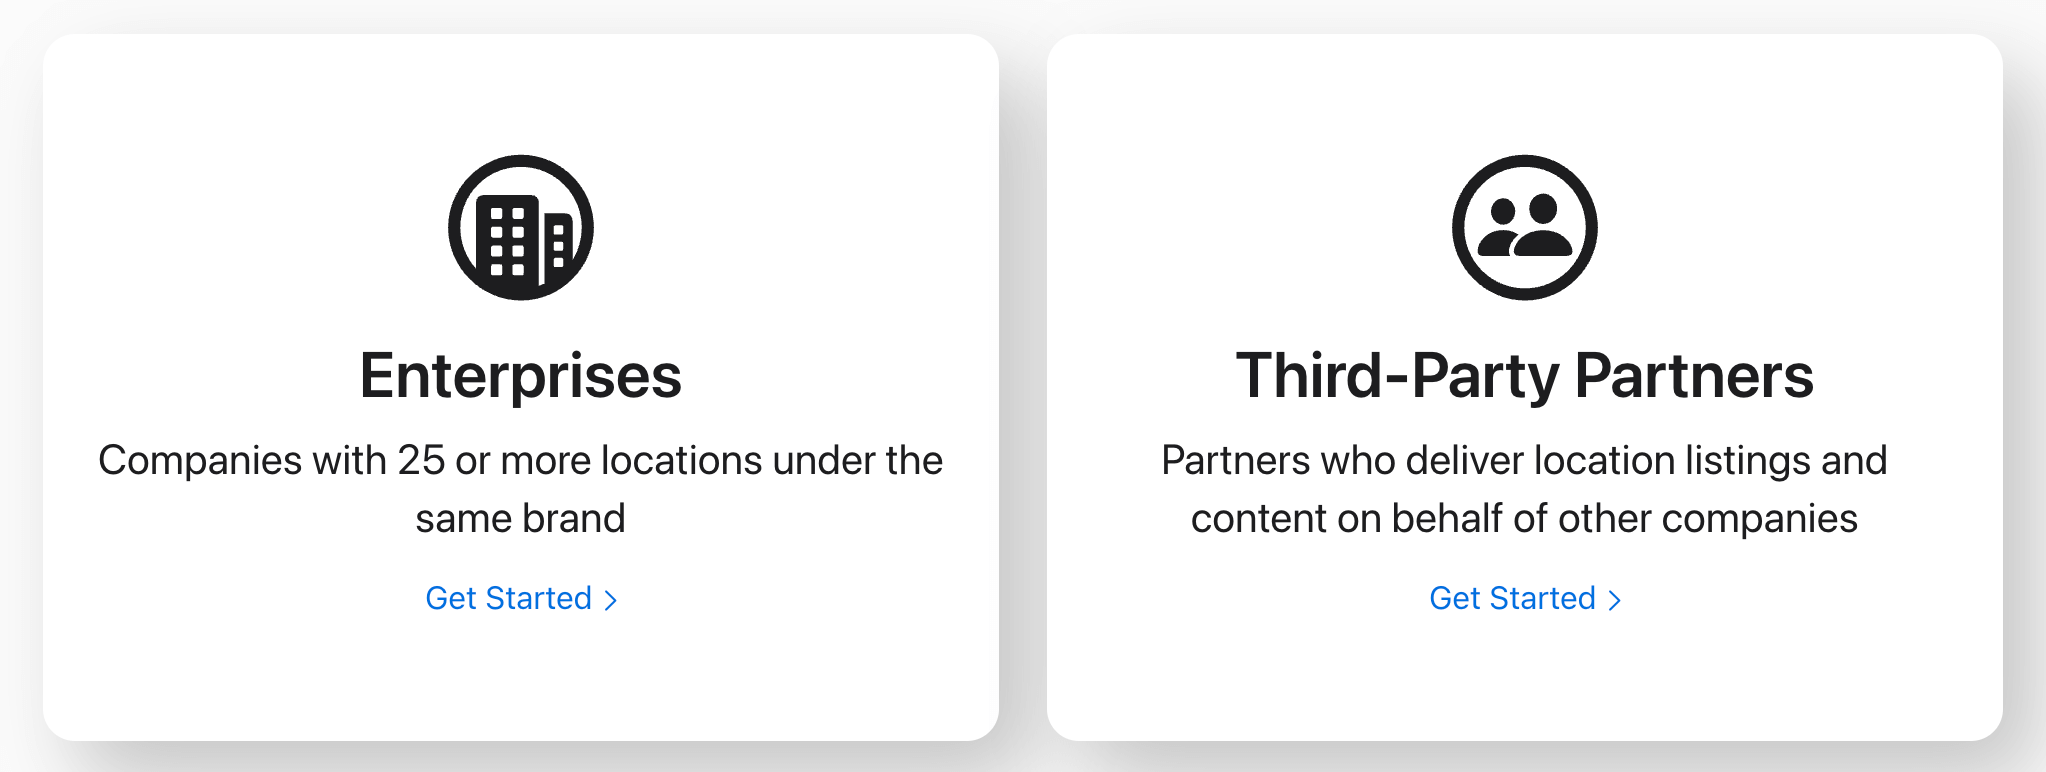 Apple Business Connect is also available for Enterprises with 25 or more locations and third-party partners who deliver location listings.